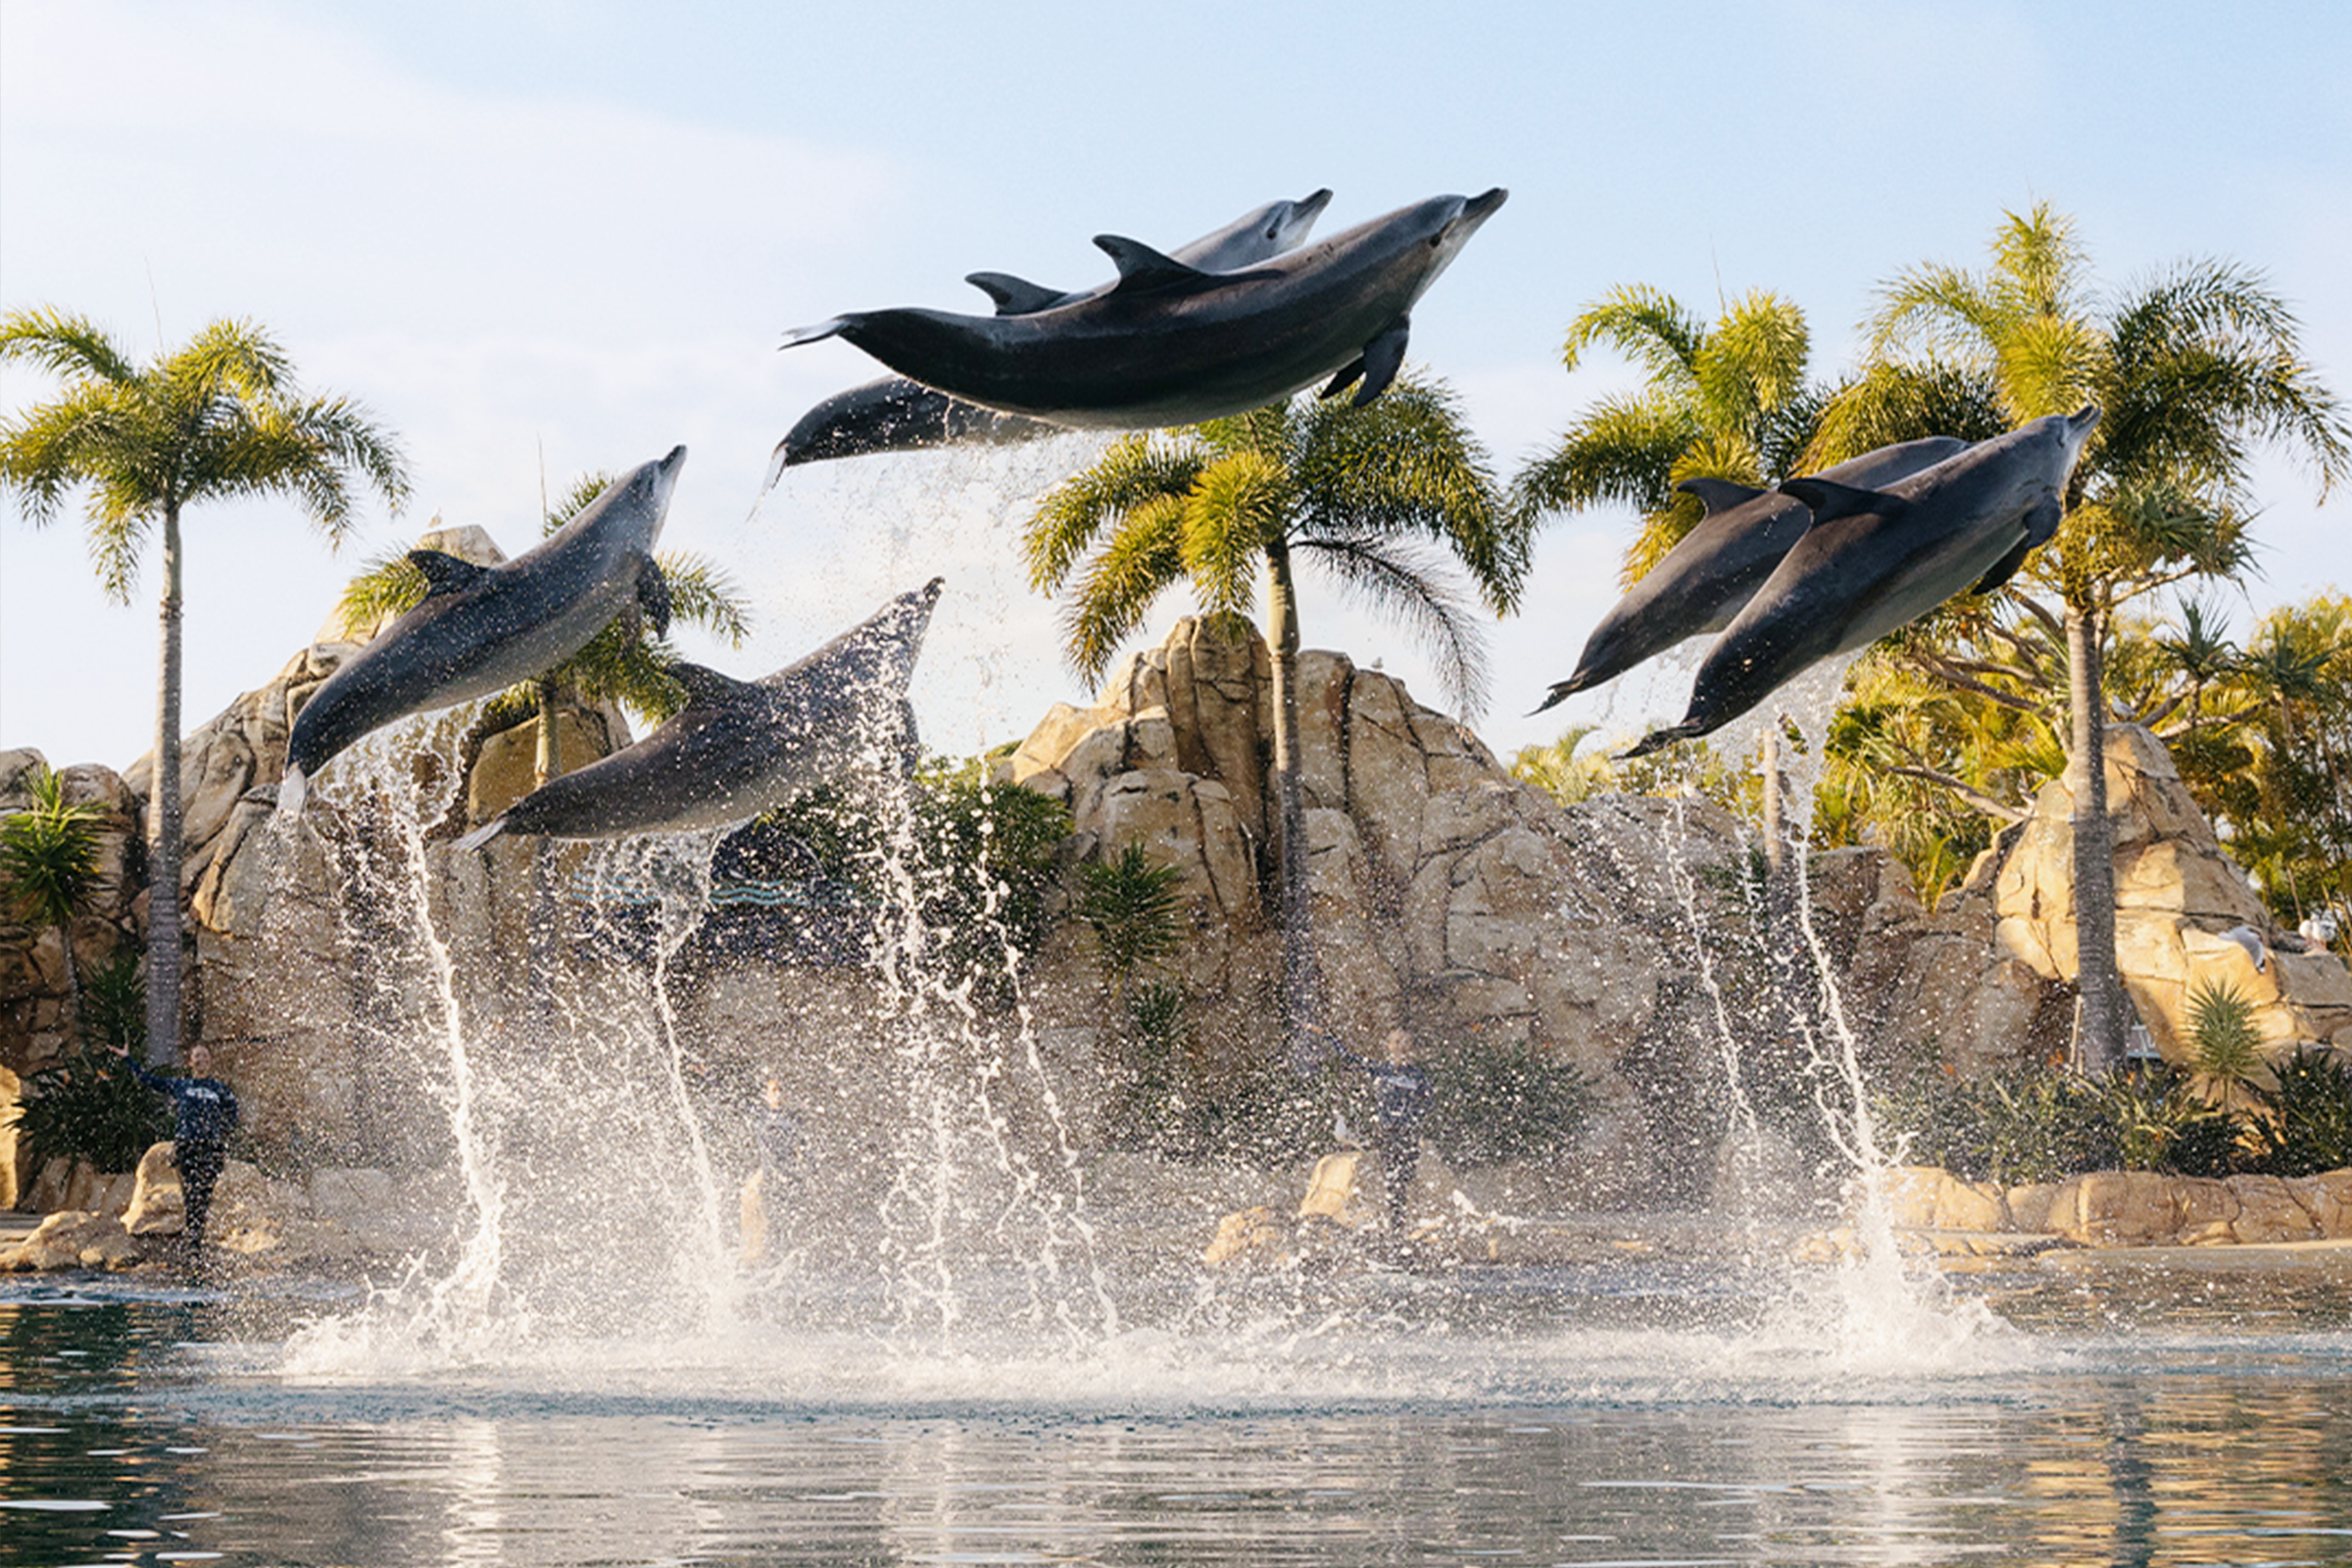 Dolphins diving above water.